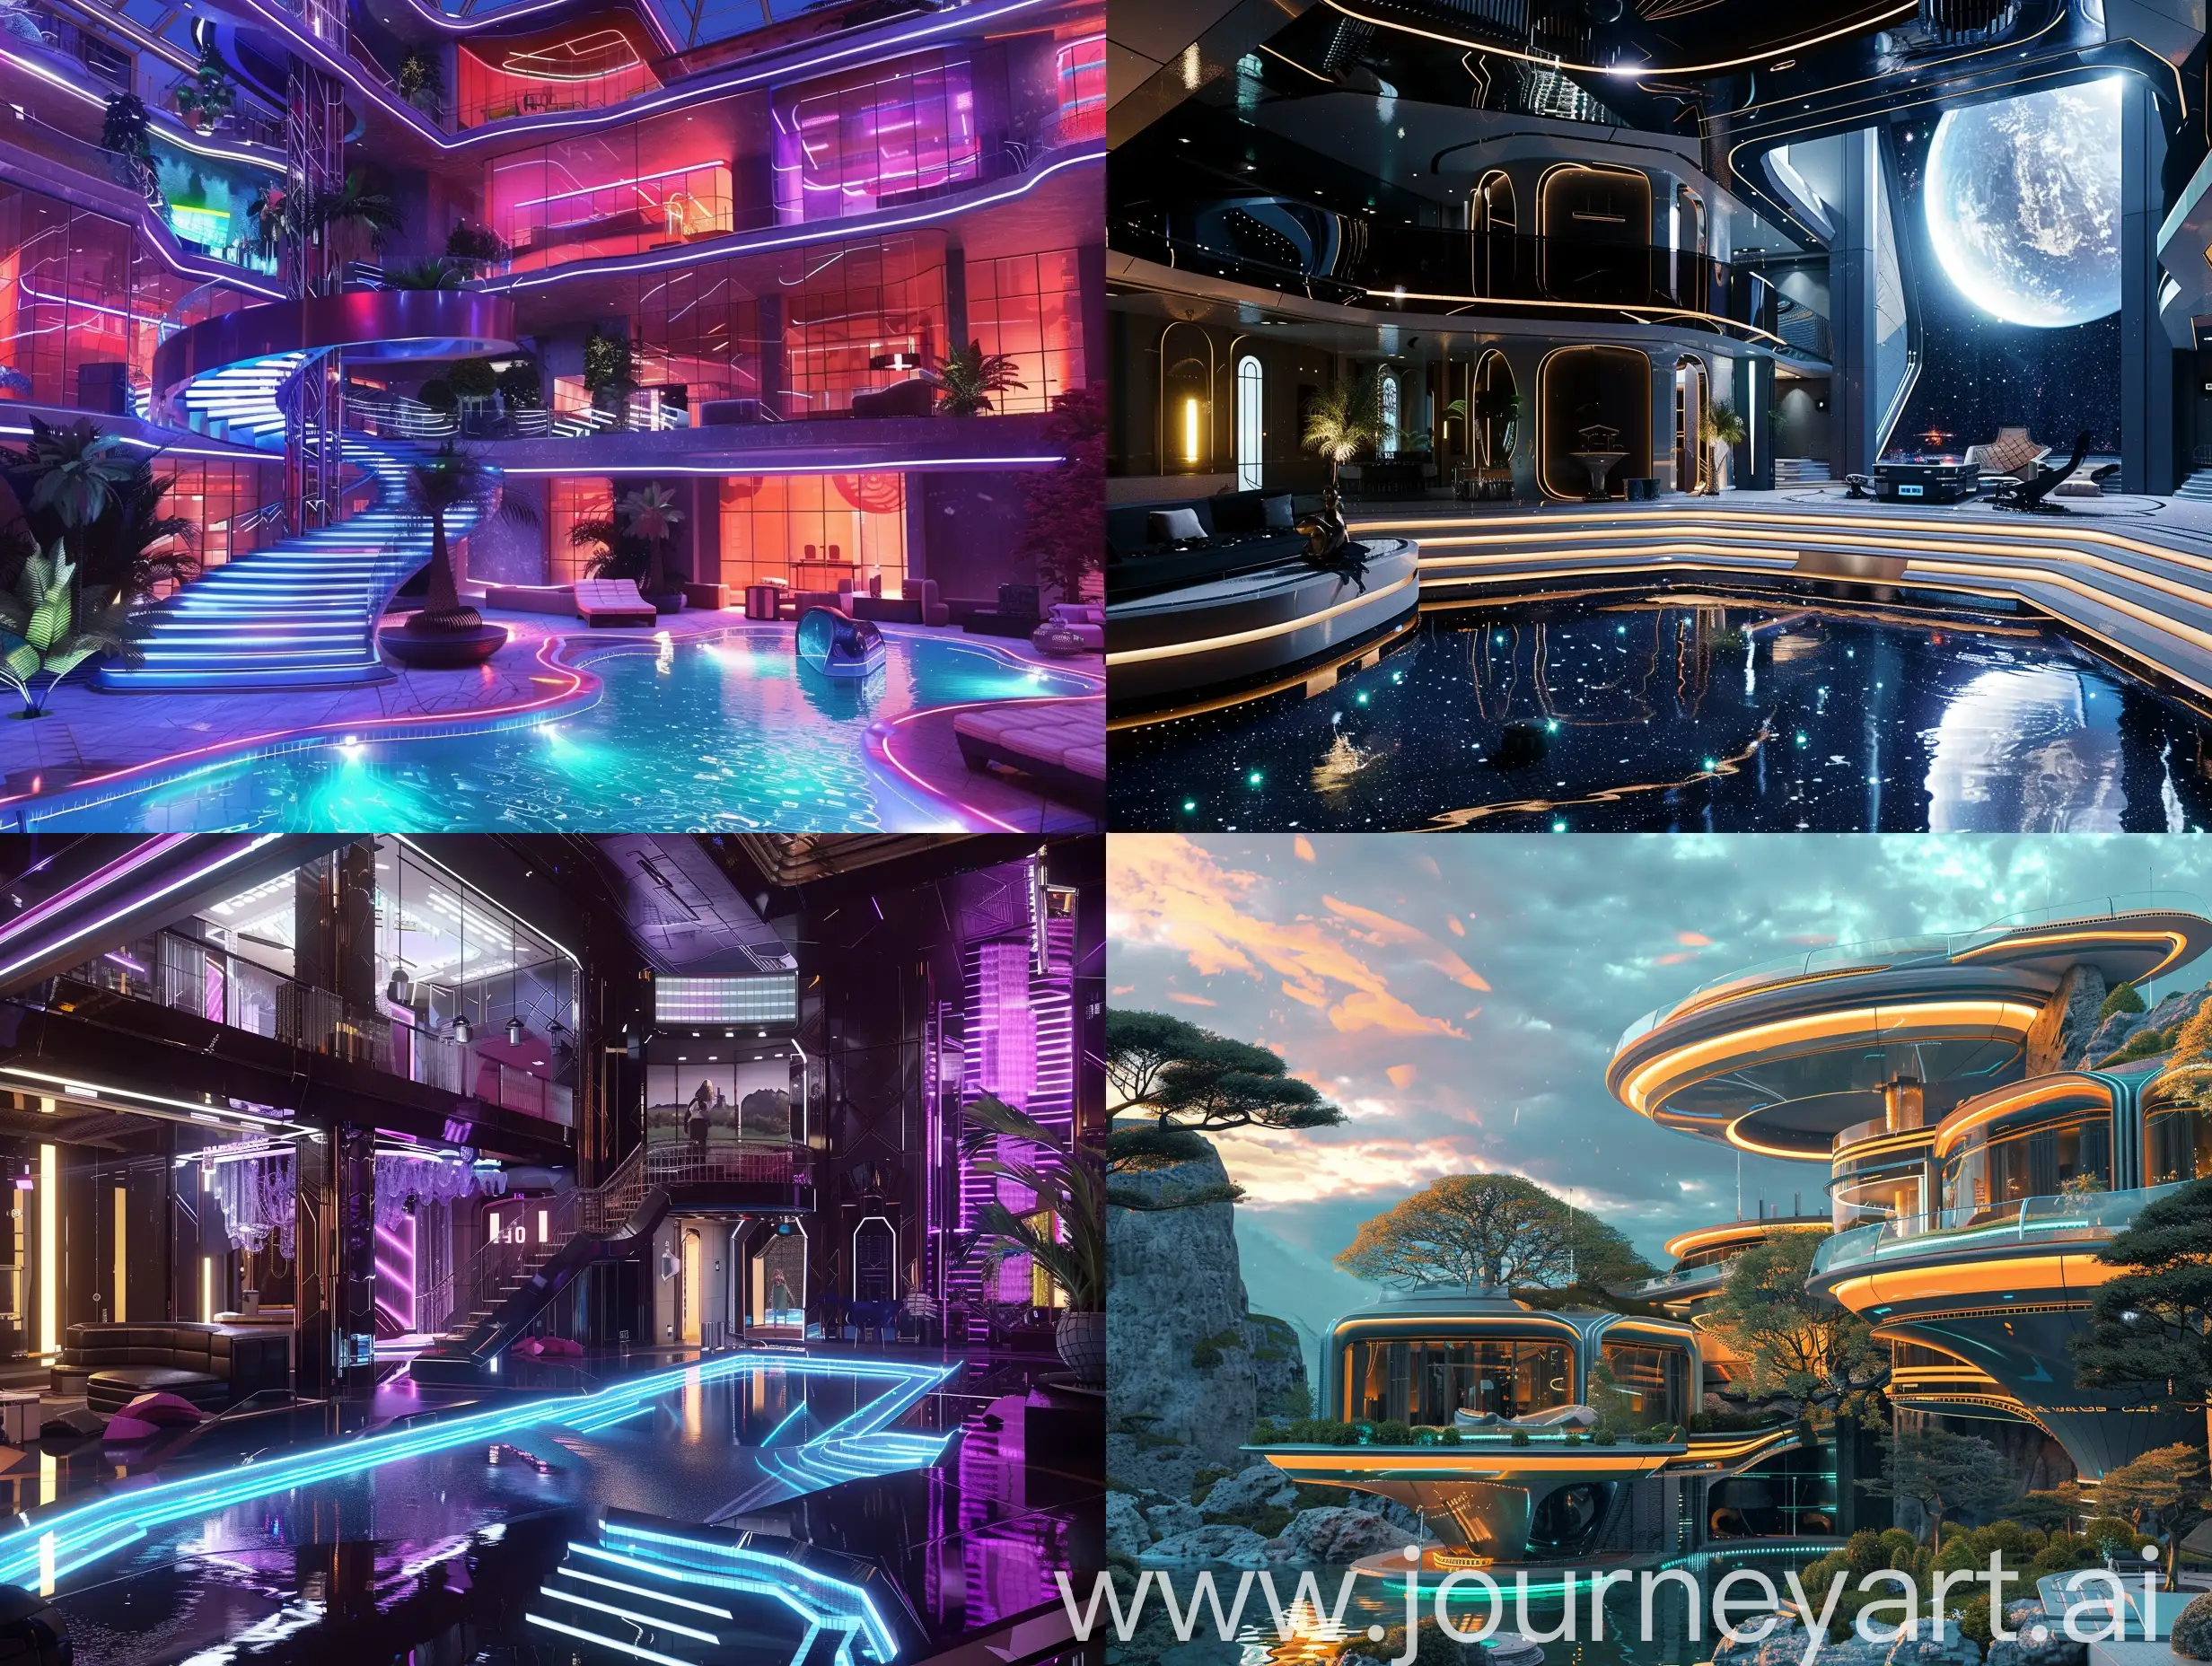 Luxurious-Cyberpunk-Mansion-with-Futuristic-Architecture